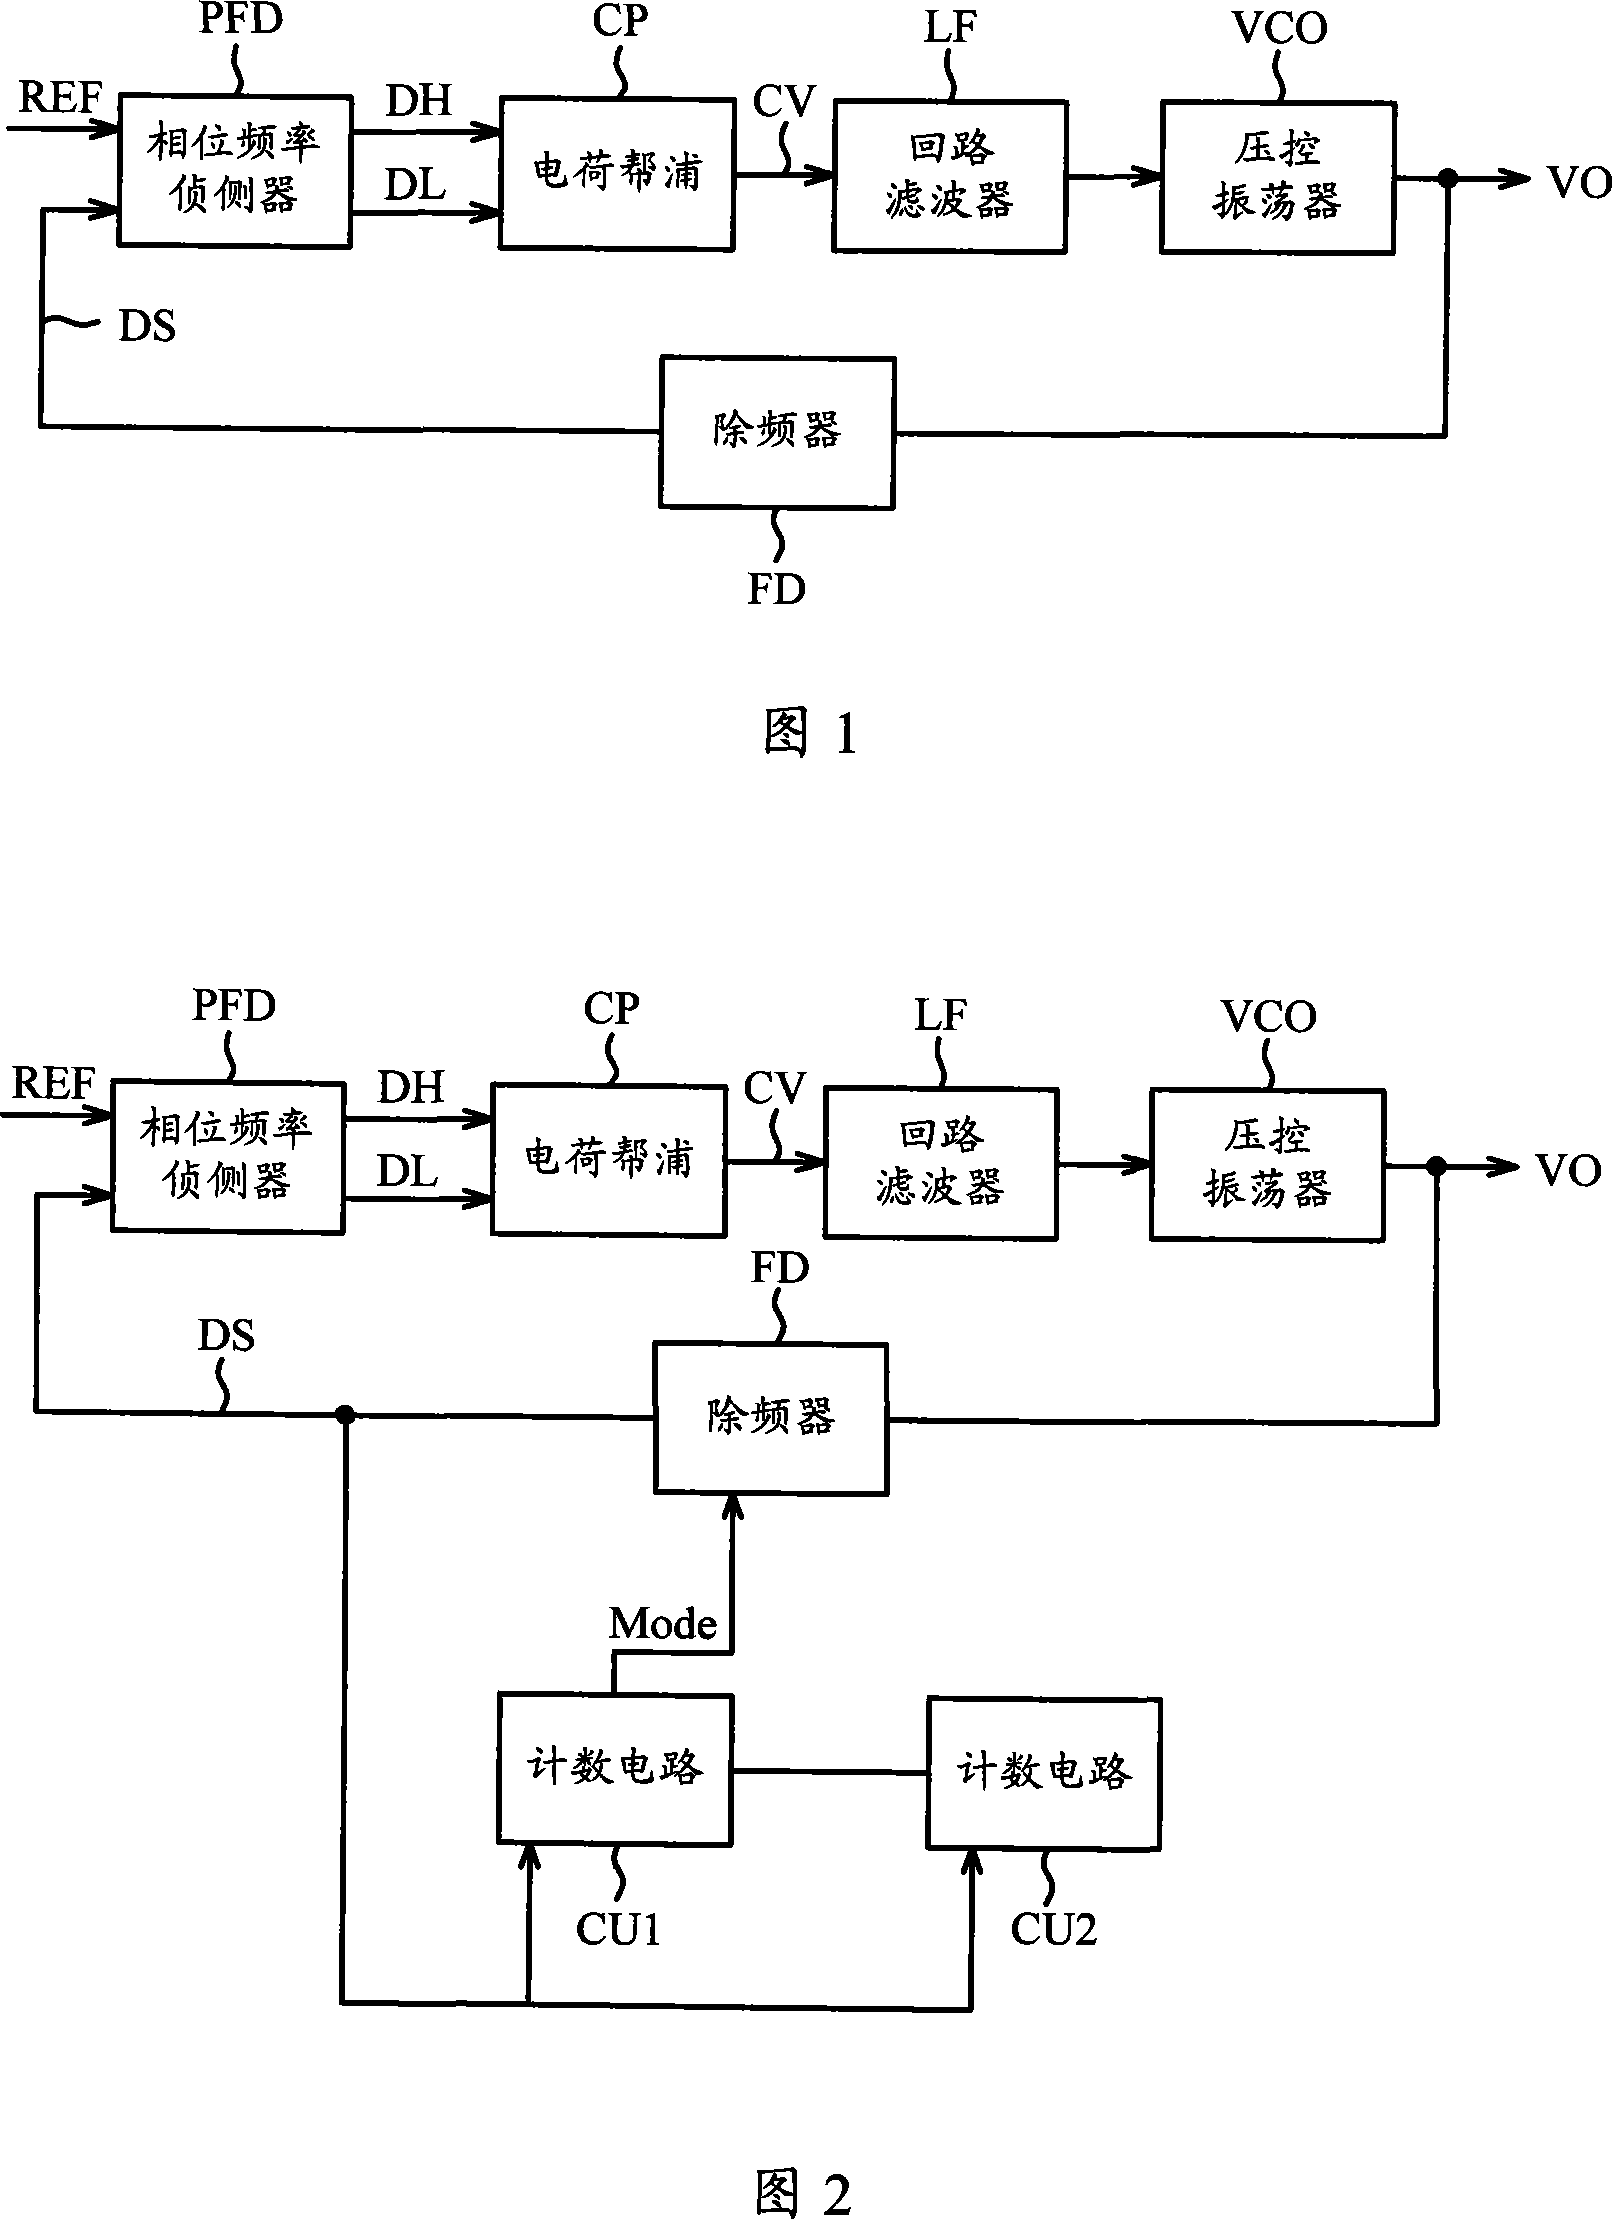 A non-integer frequency difference eliminator and phase-lock loop that can product non-integer real-time clock signal